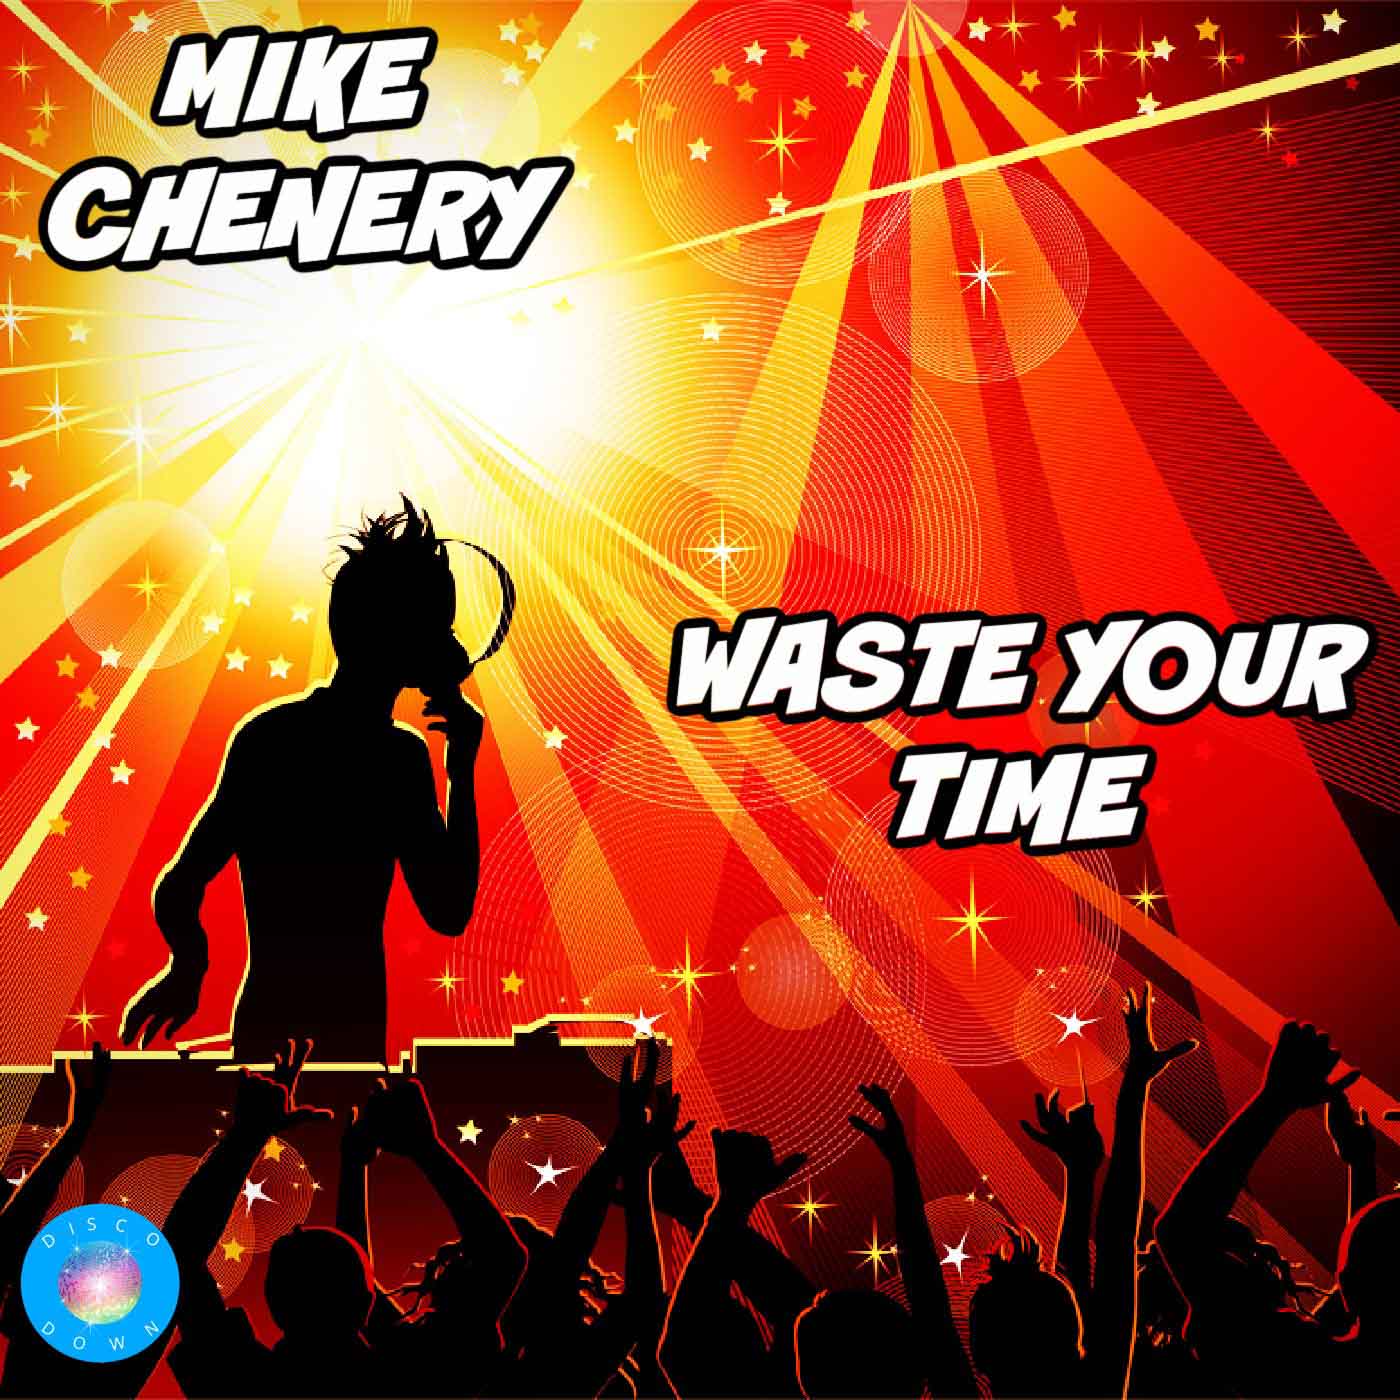 Mike Chenery - Waste Your Time (Original Mix)